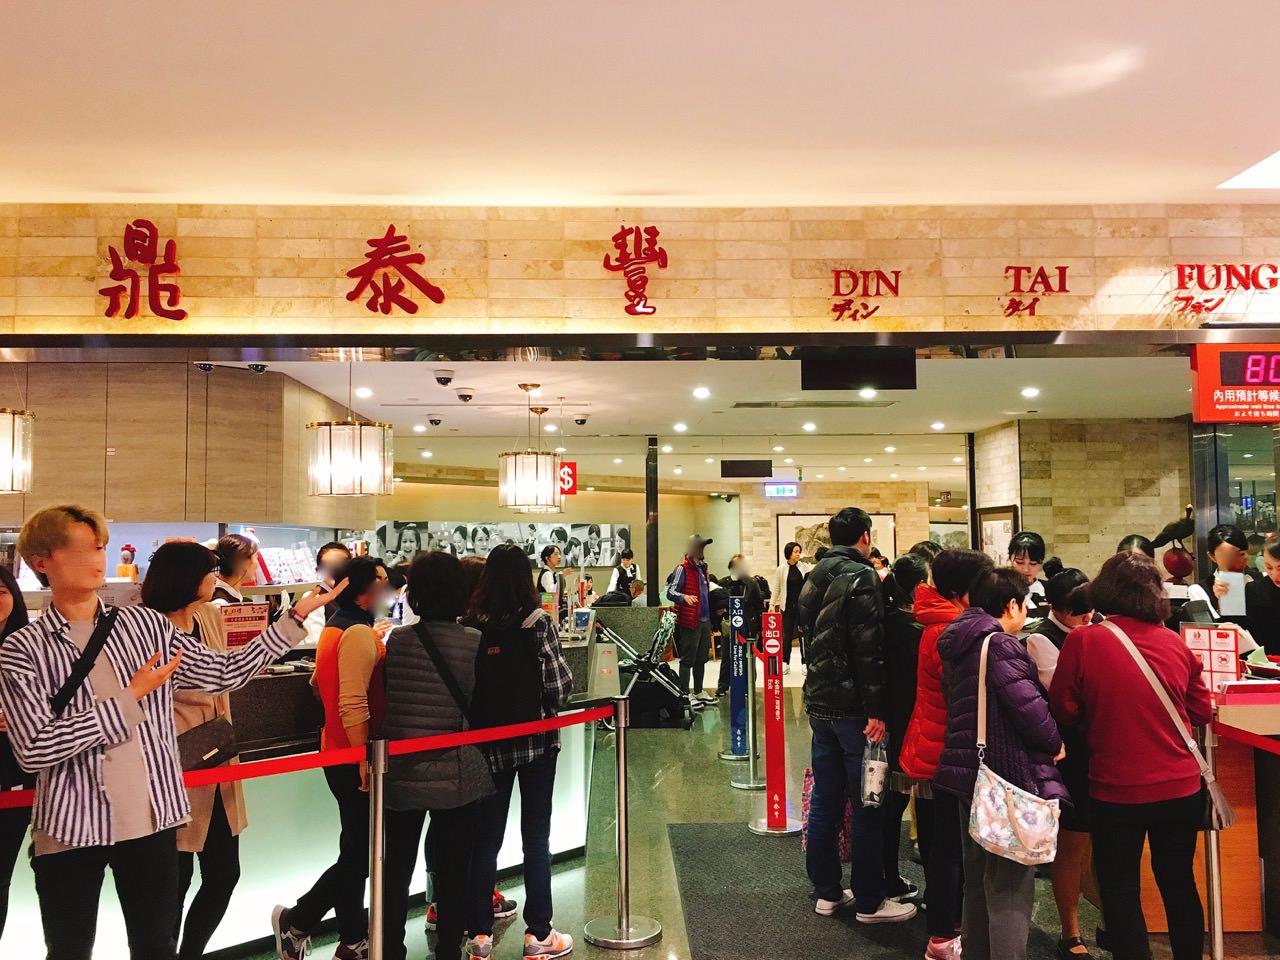 The most famous restaurant at Taipei 101 would be Din Tai Fung. Same as the Yongkang Din Tai Fung, customers line up for their famous cuisine.